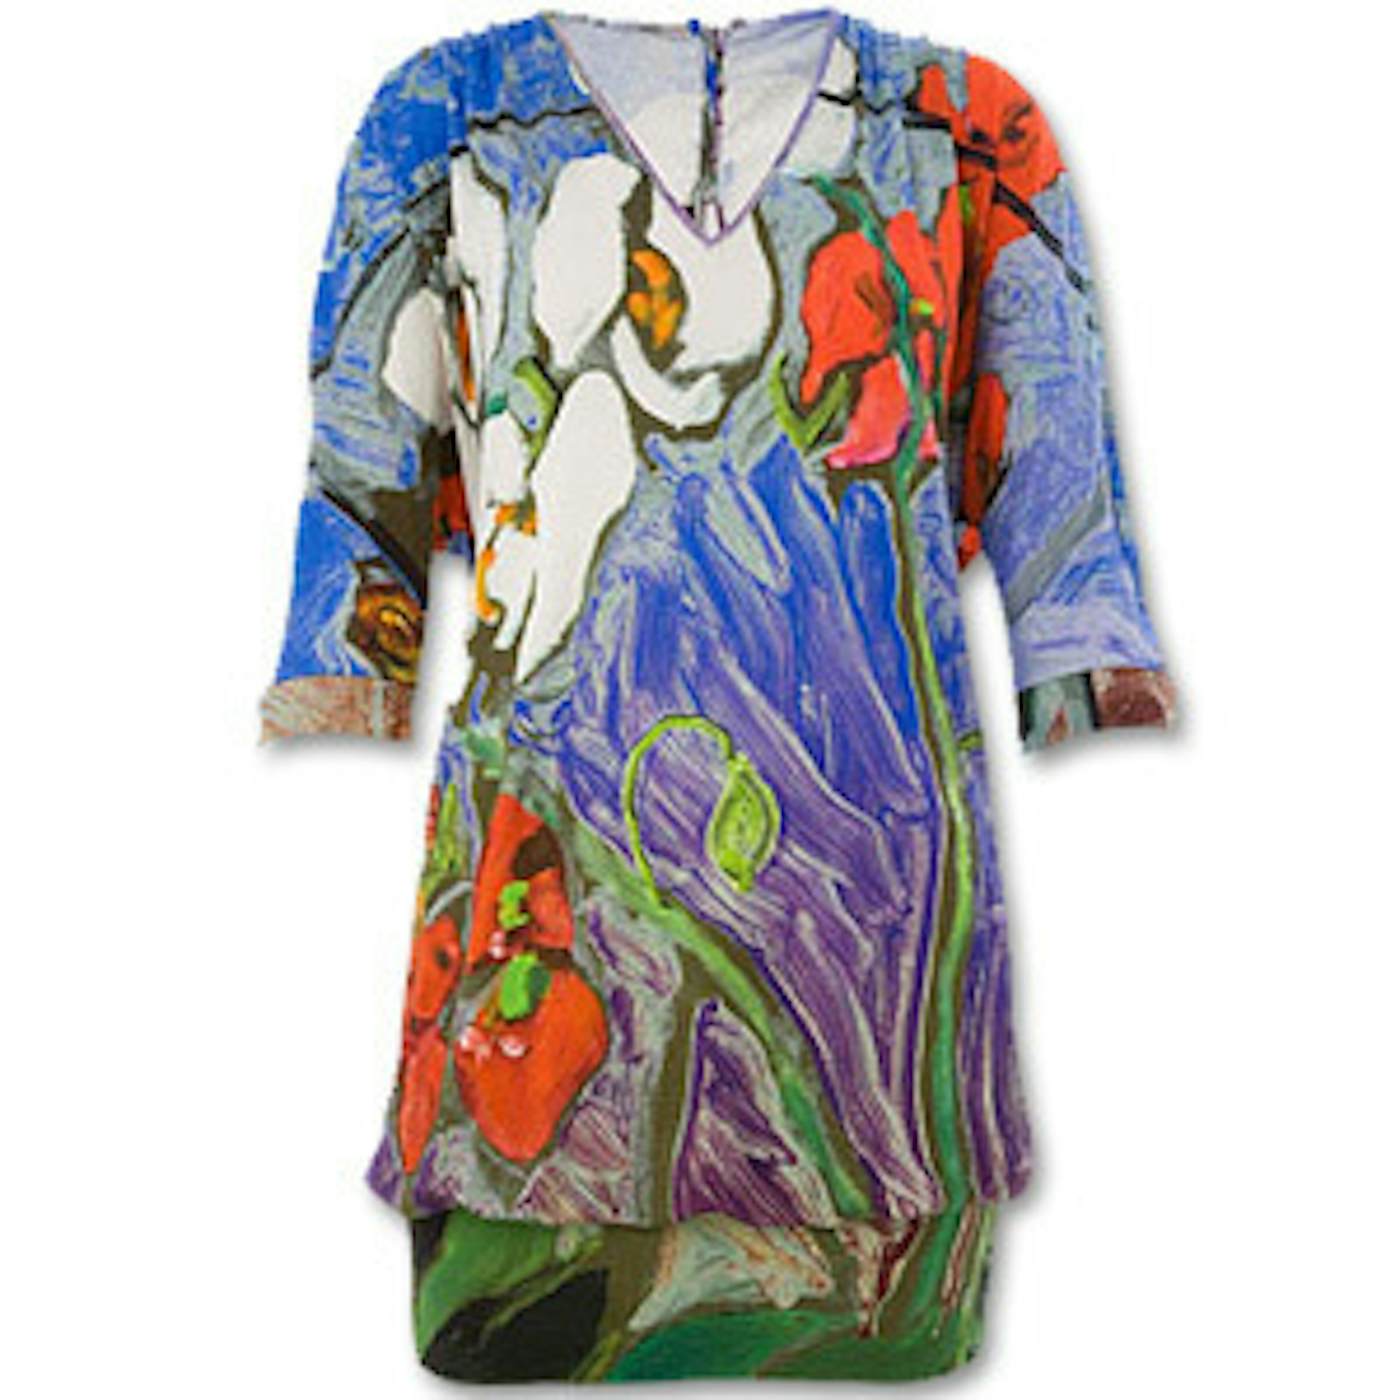 Blue Orchid Bat Dress, Ronnie Wood for Liberty of London